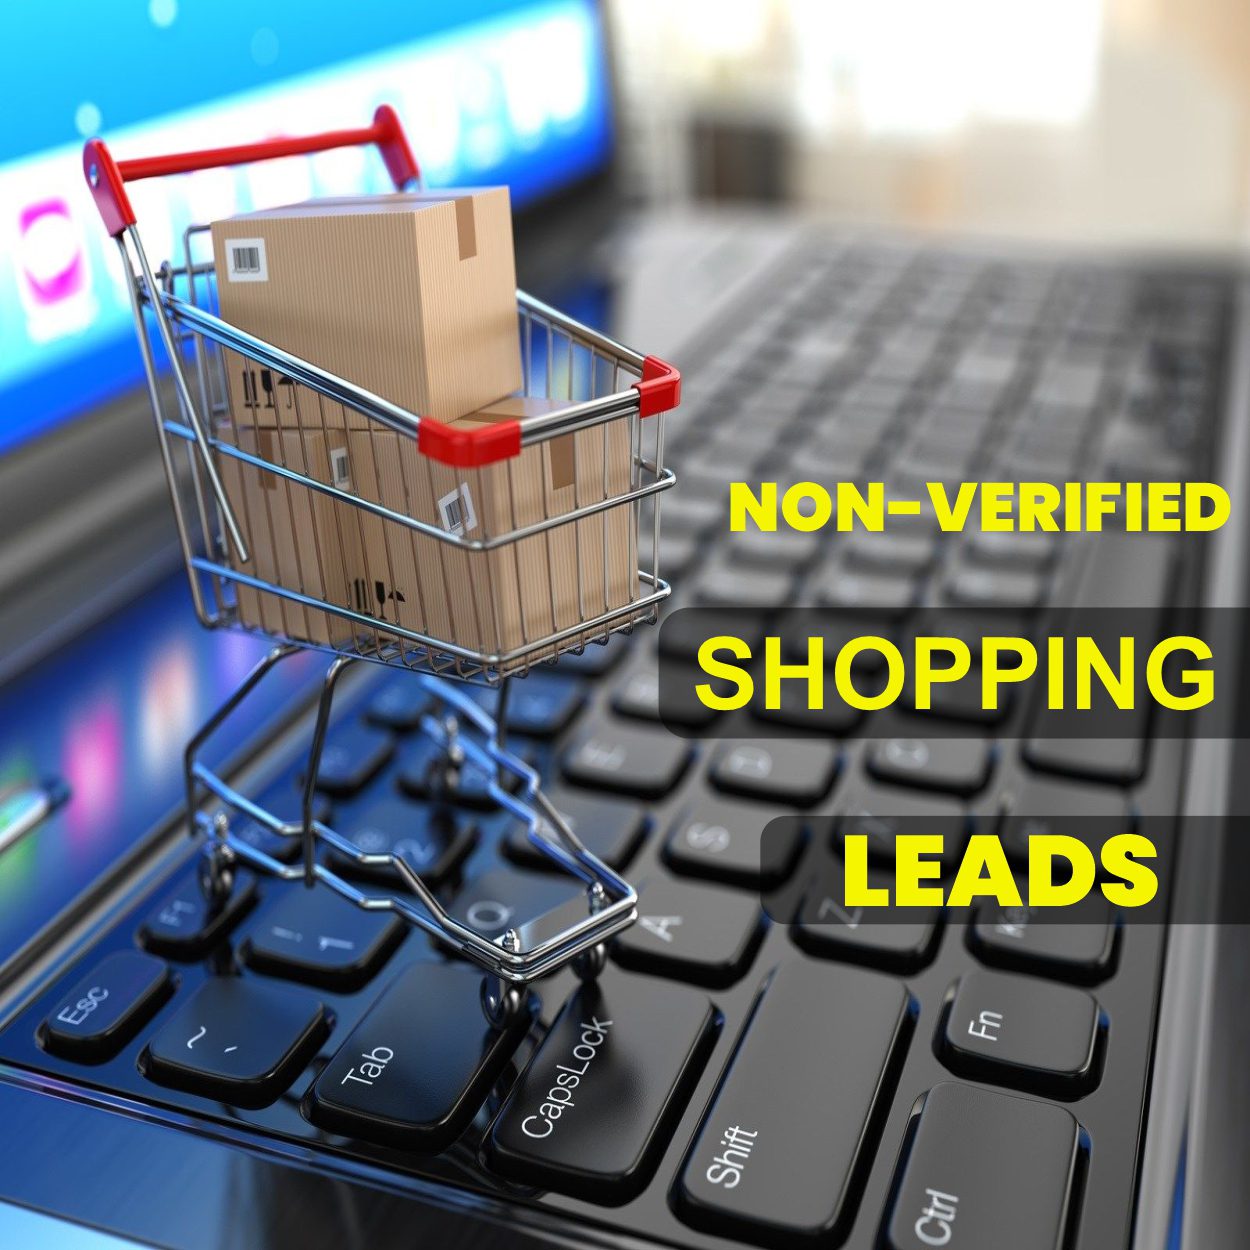 Non-verified-shopping-leads